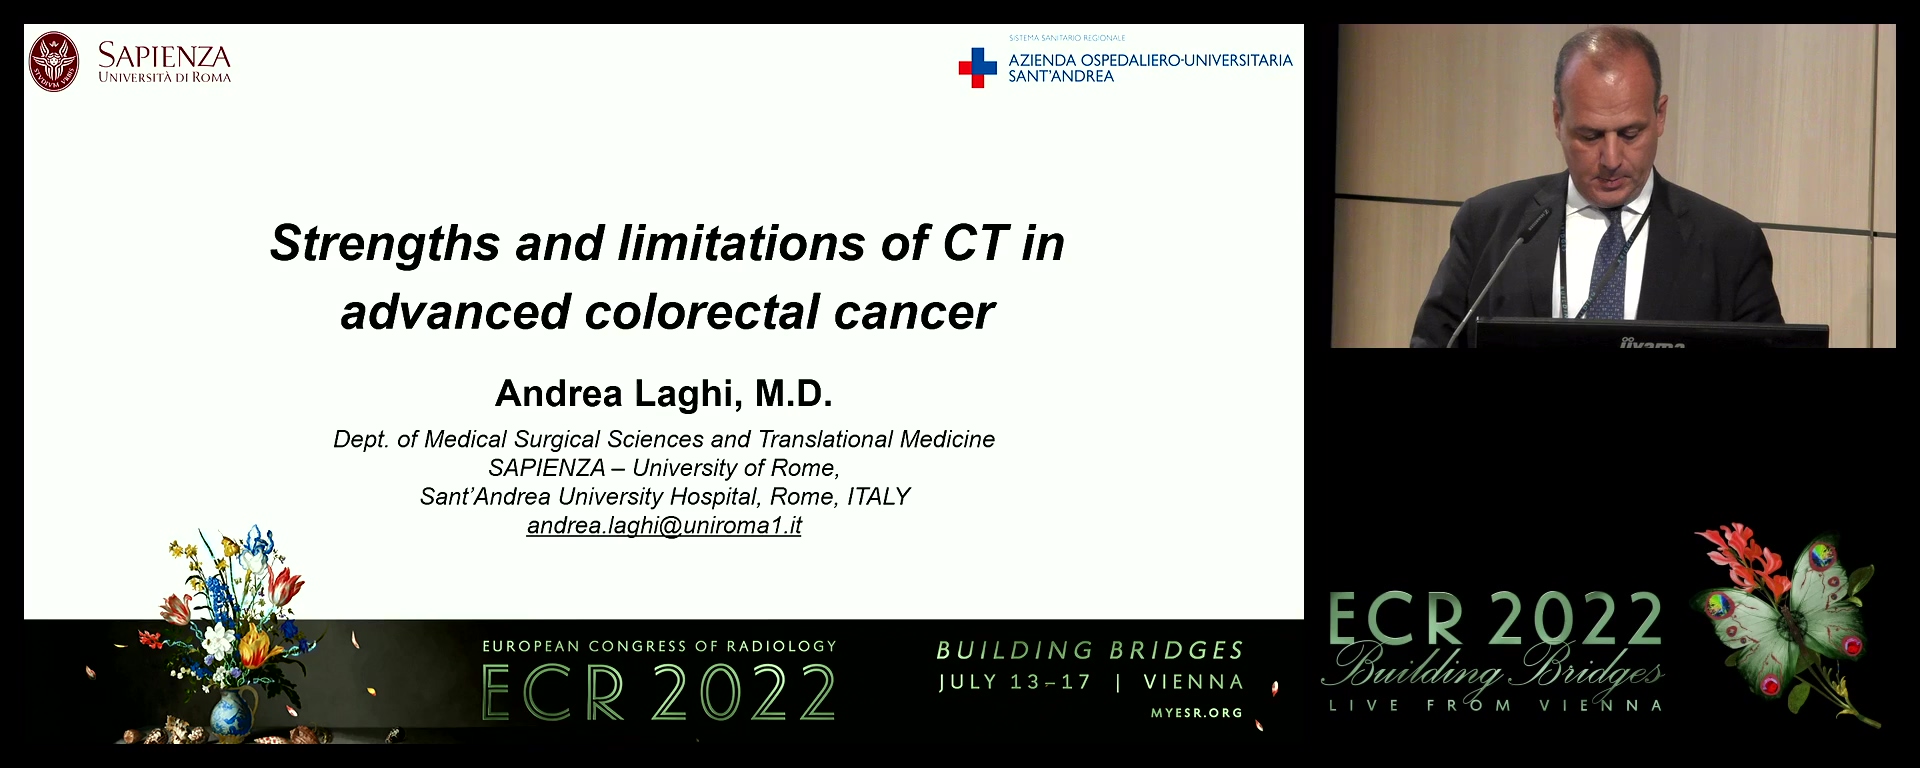 Strengths and limitations of CT in advanced colorectal cancer - Andrea Laghi, Rome / IT